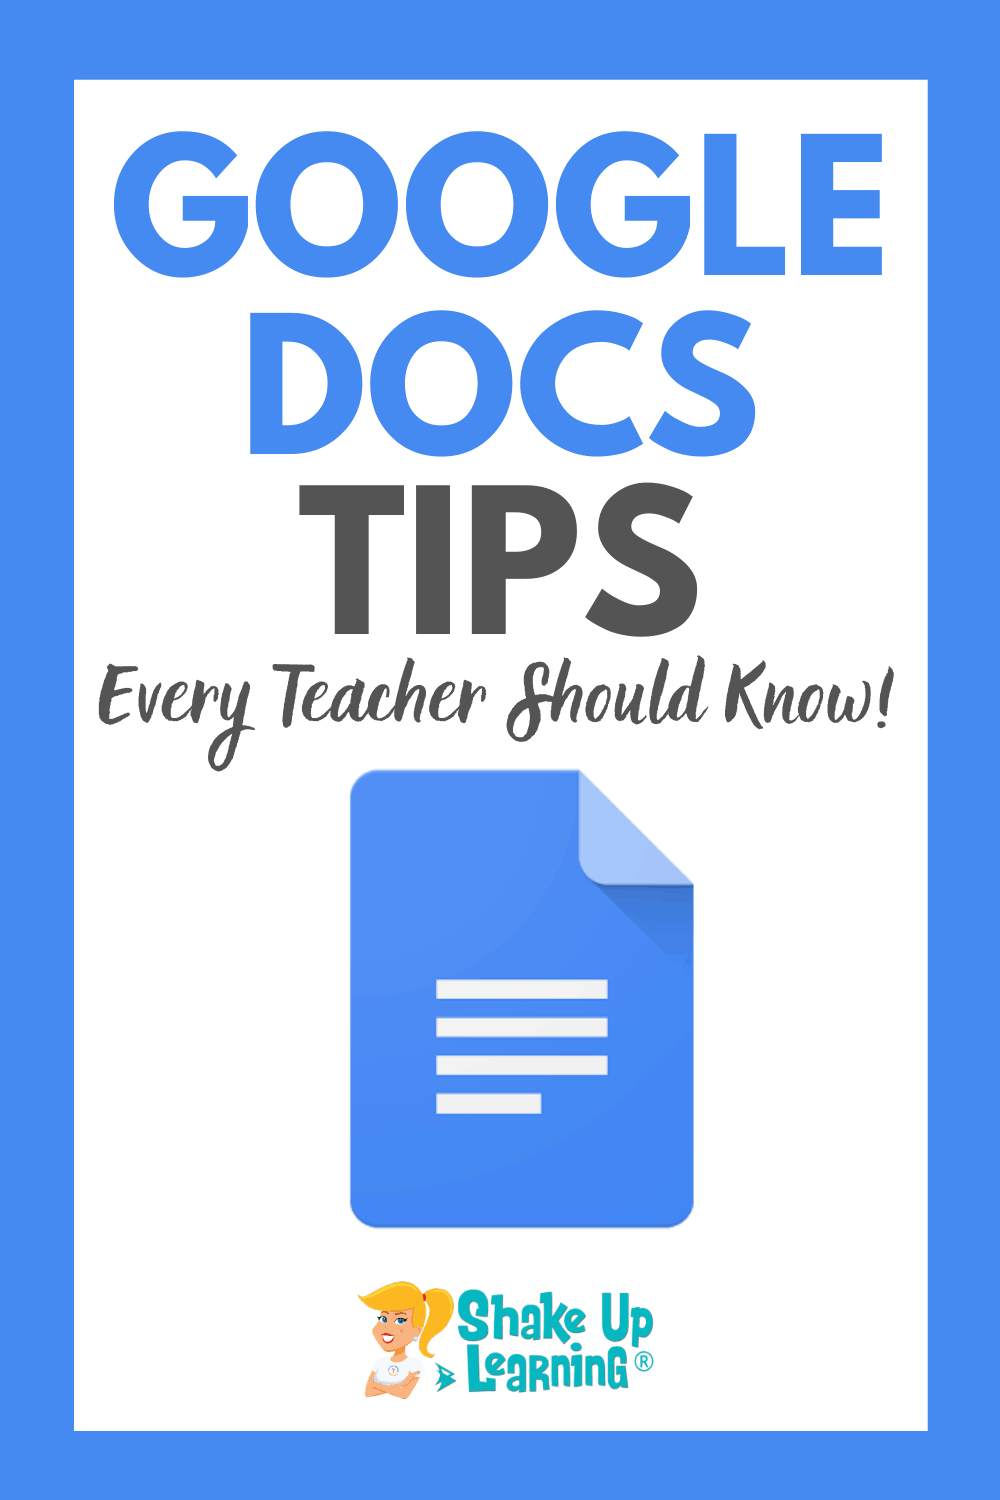 10 Google Docs Tips Every Teacher Should Know | Shake Up Learning